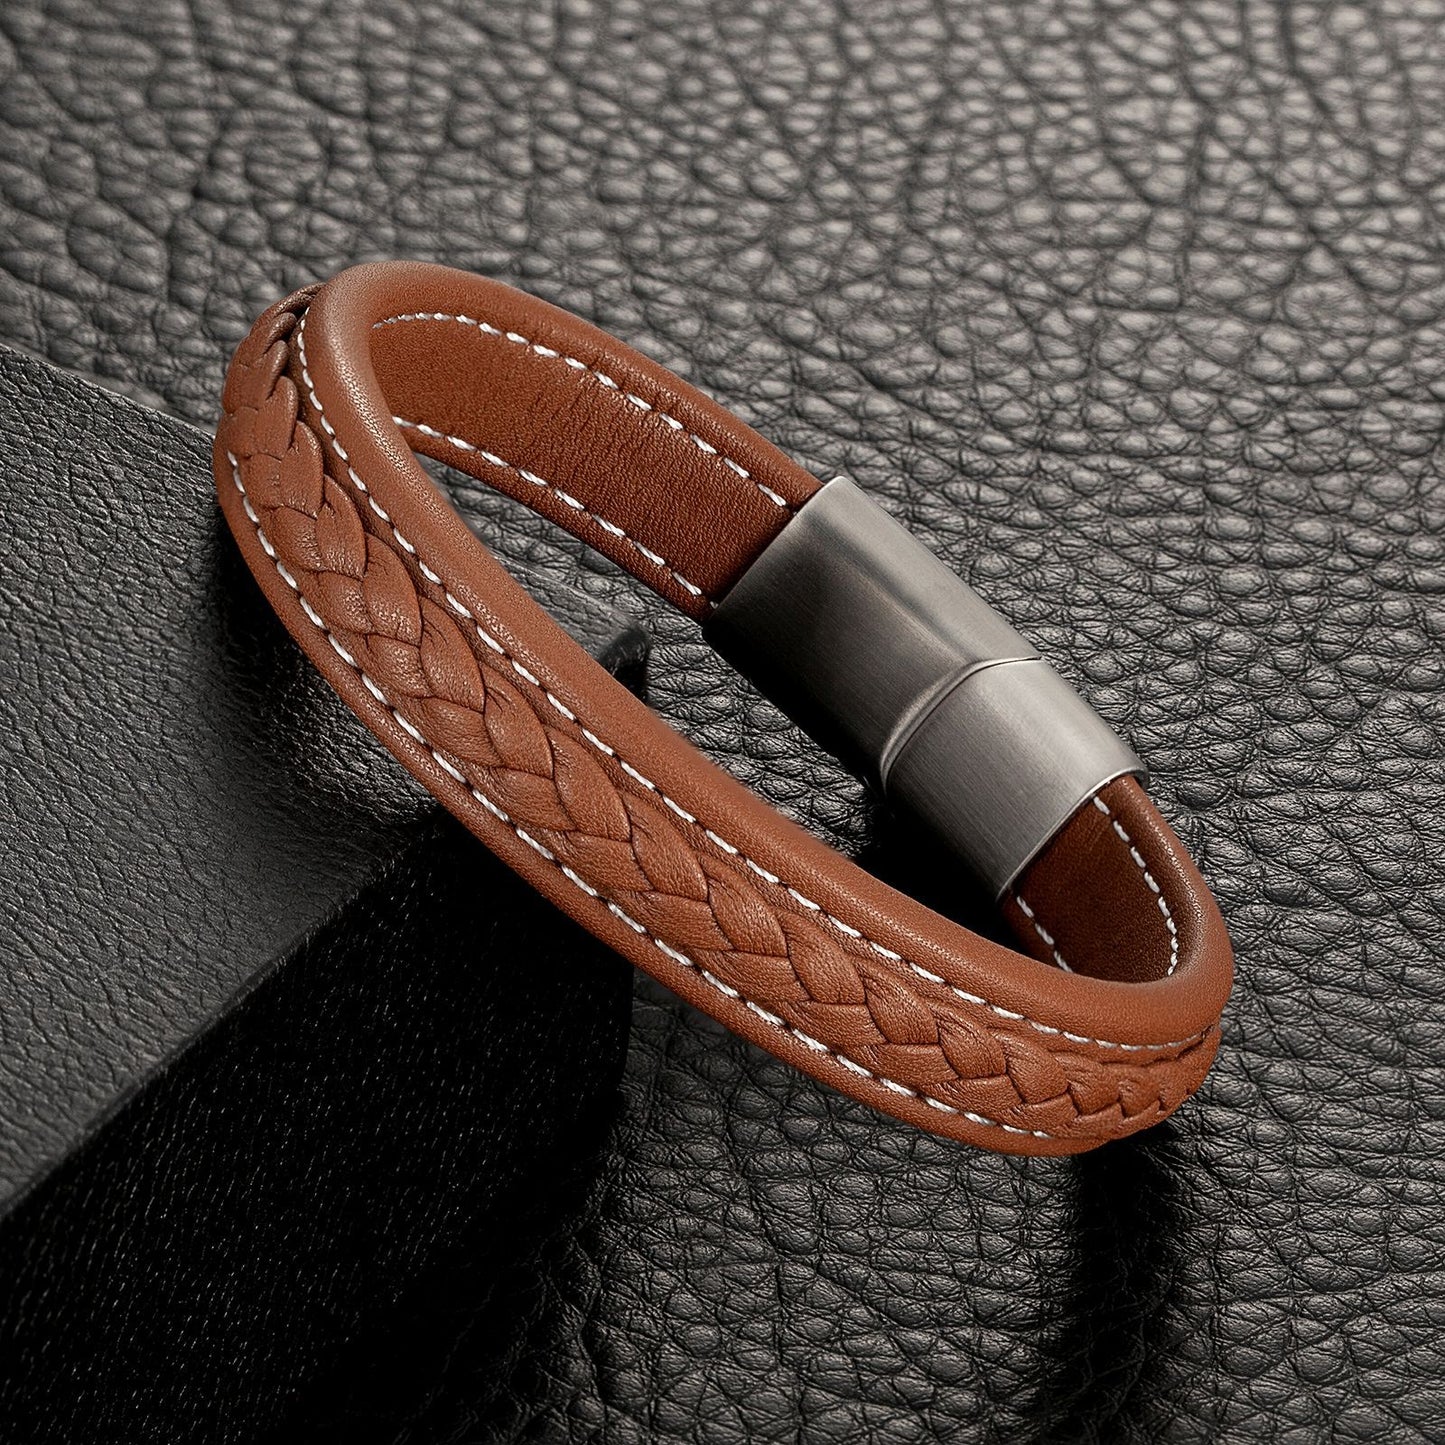 Classic leather rope bracelet stainless steel magnet buckle bracelet cowhide braided mixed color men's bracelet